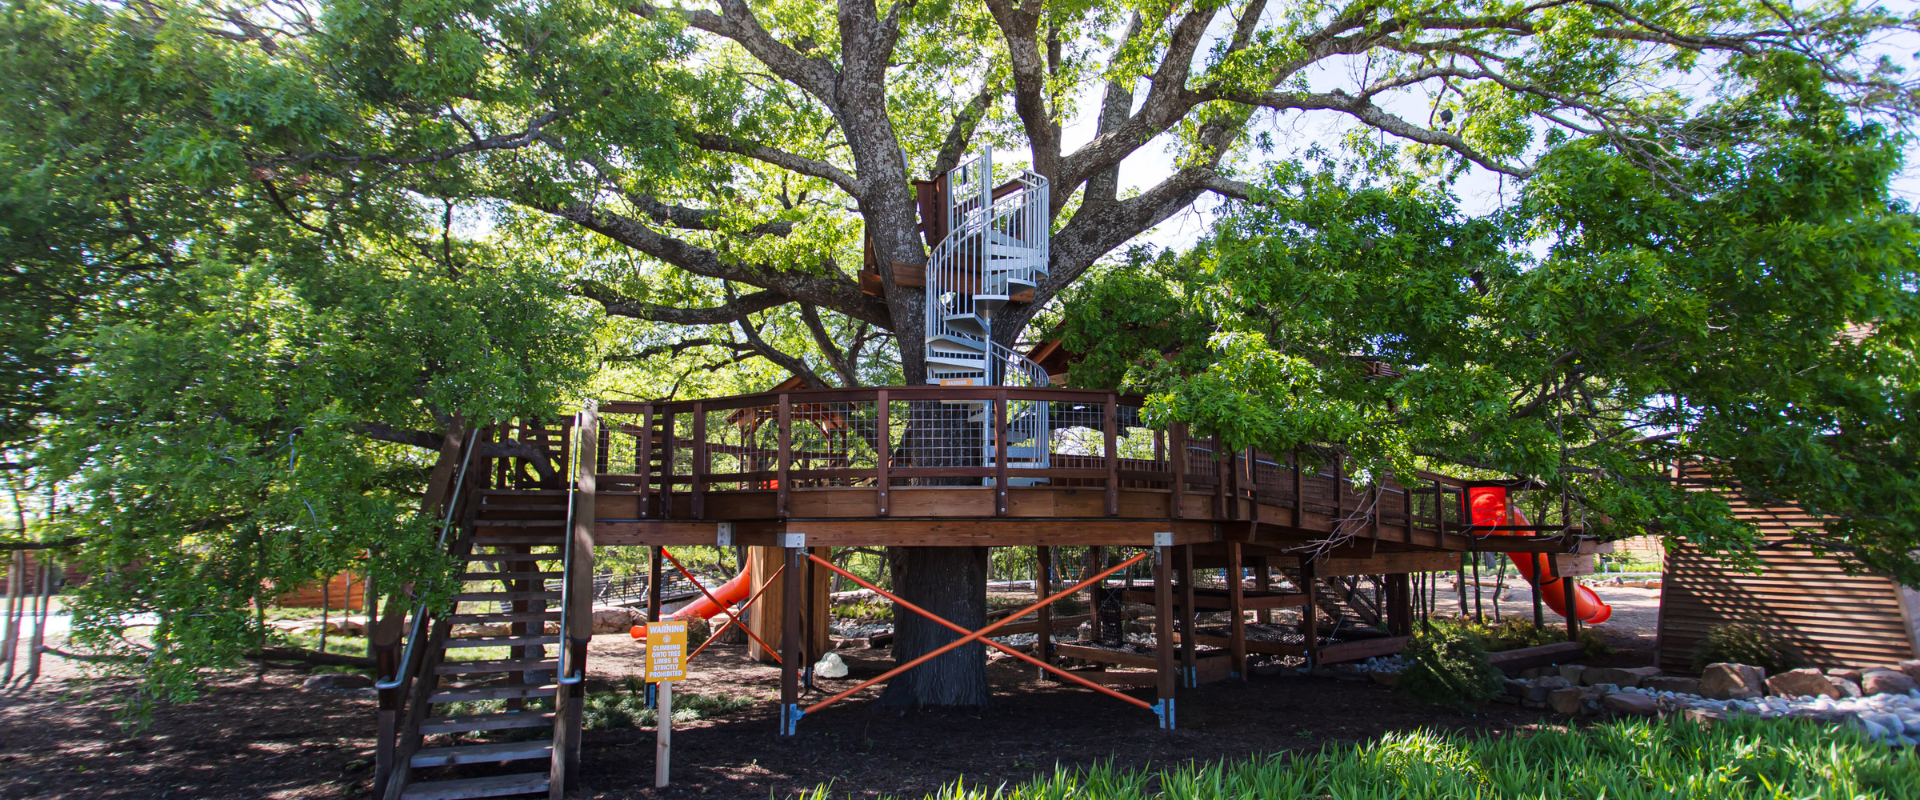 The Lookout Tree House Park